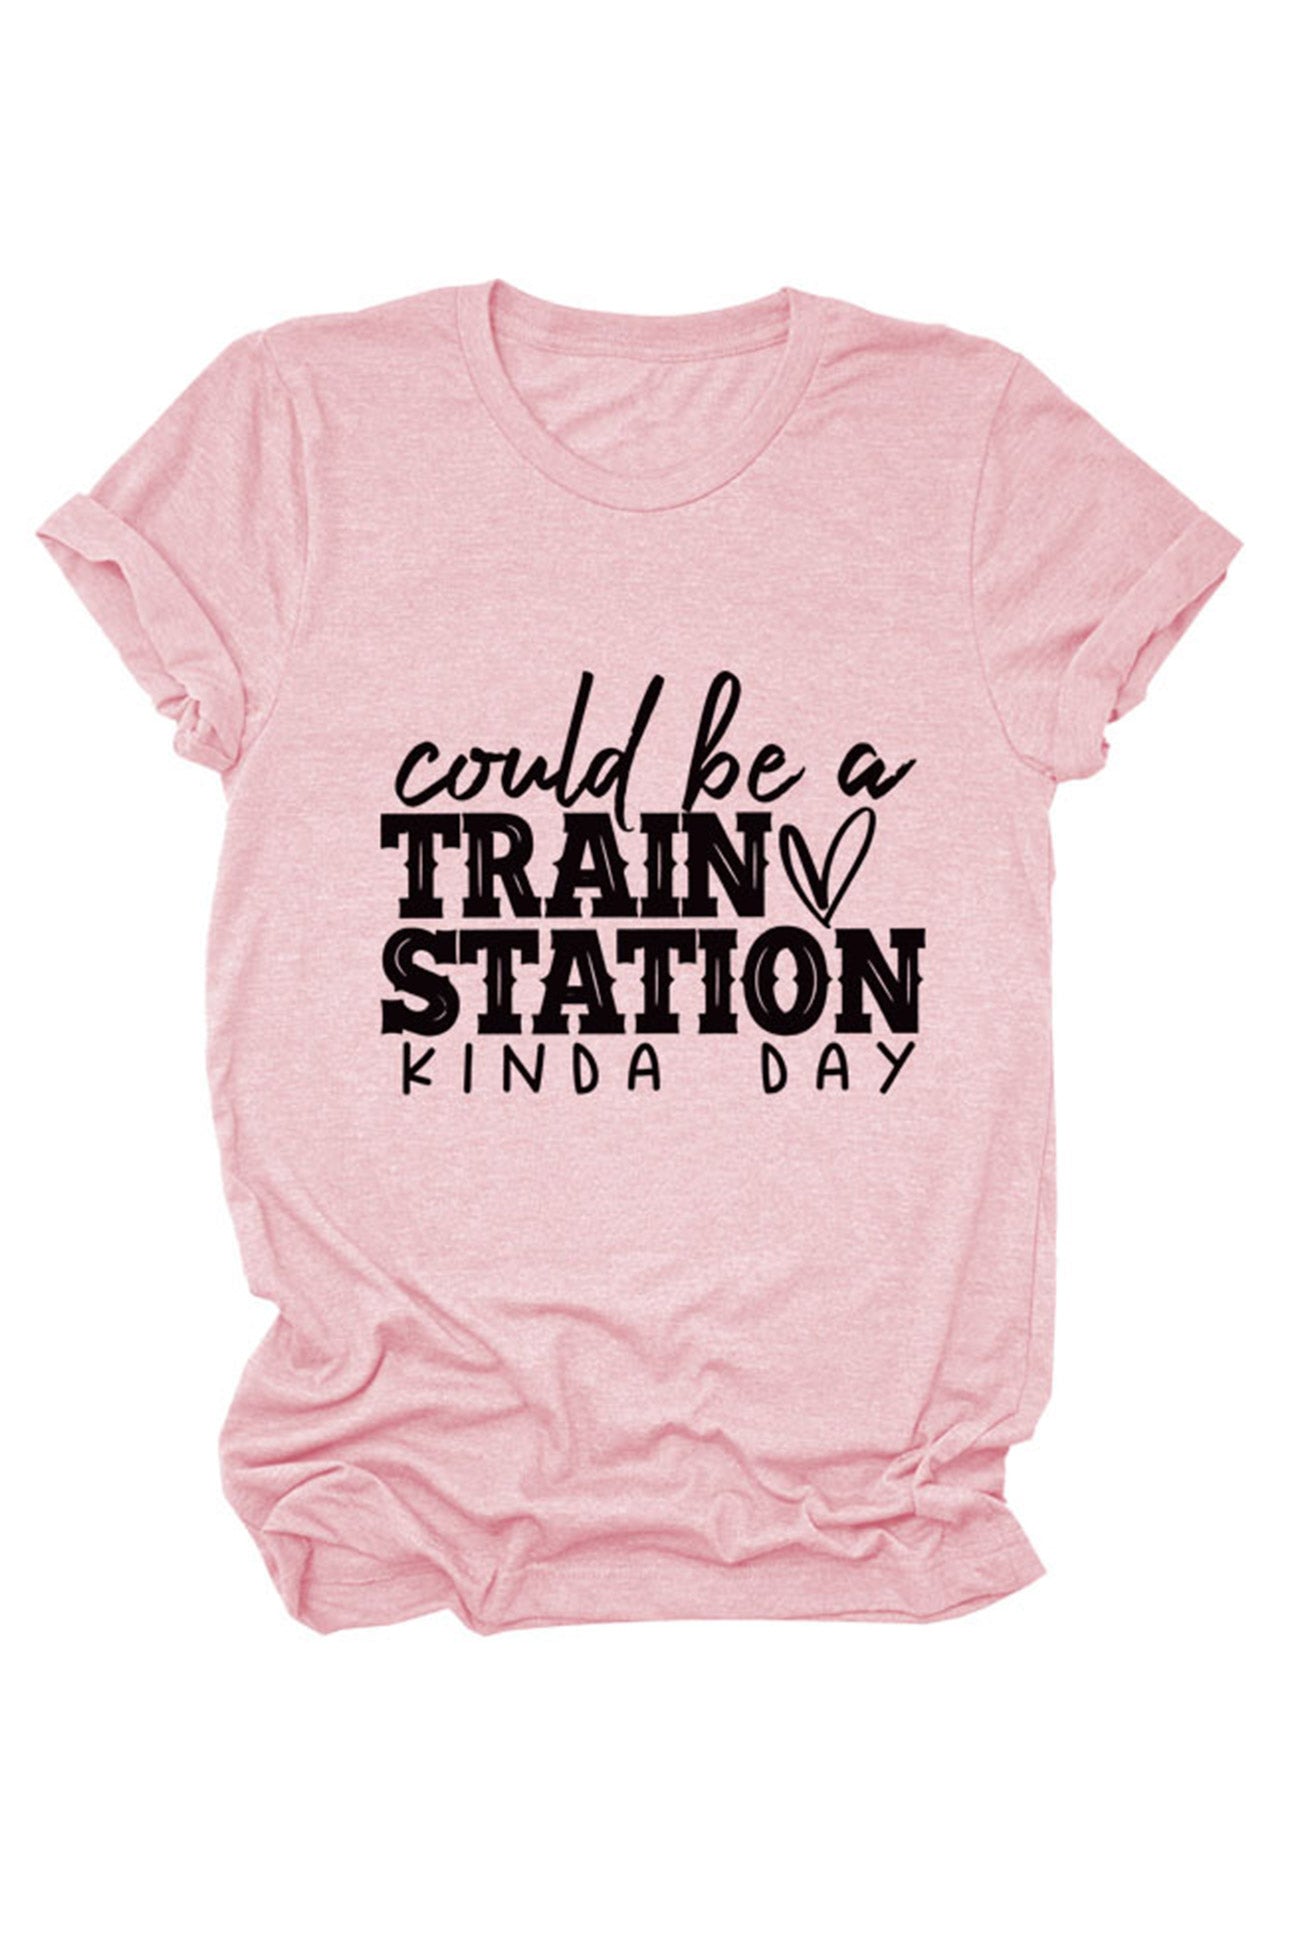 Could Be a Train Station Printed T-shirt